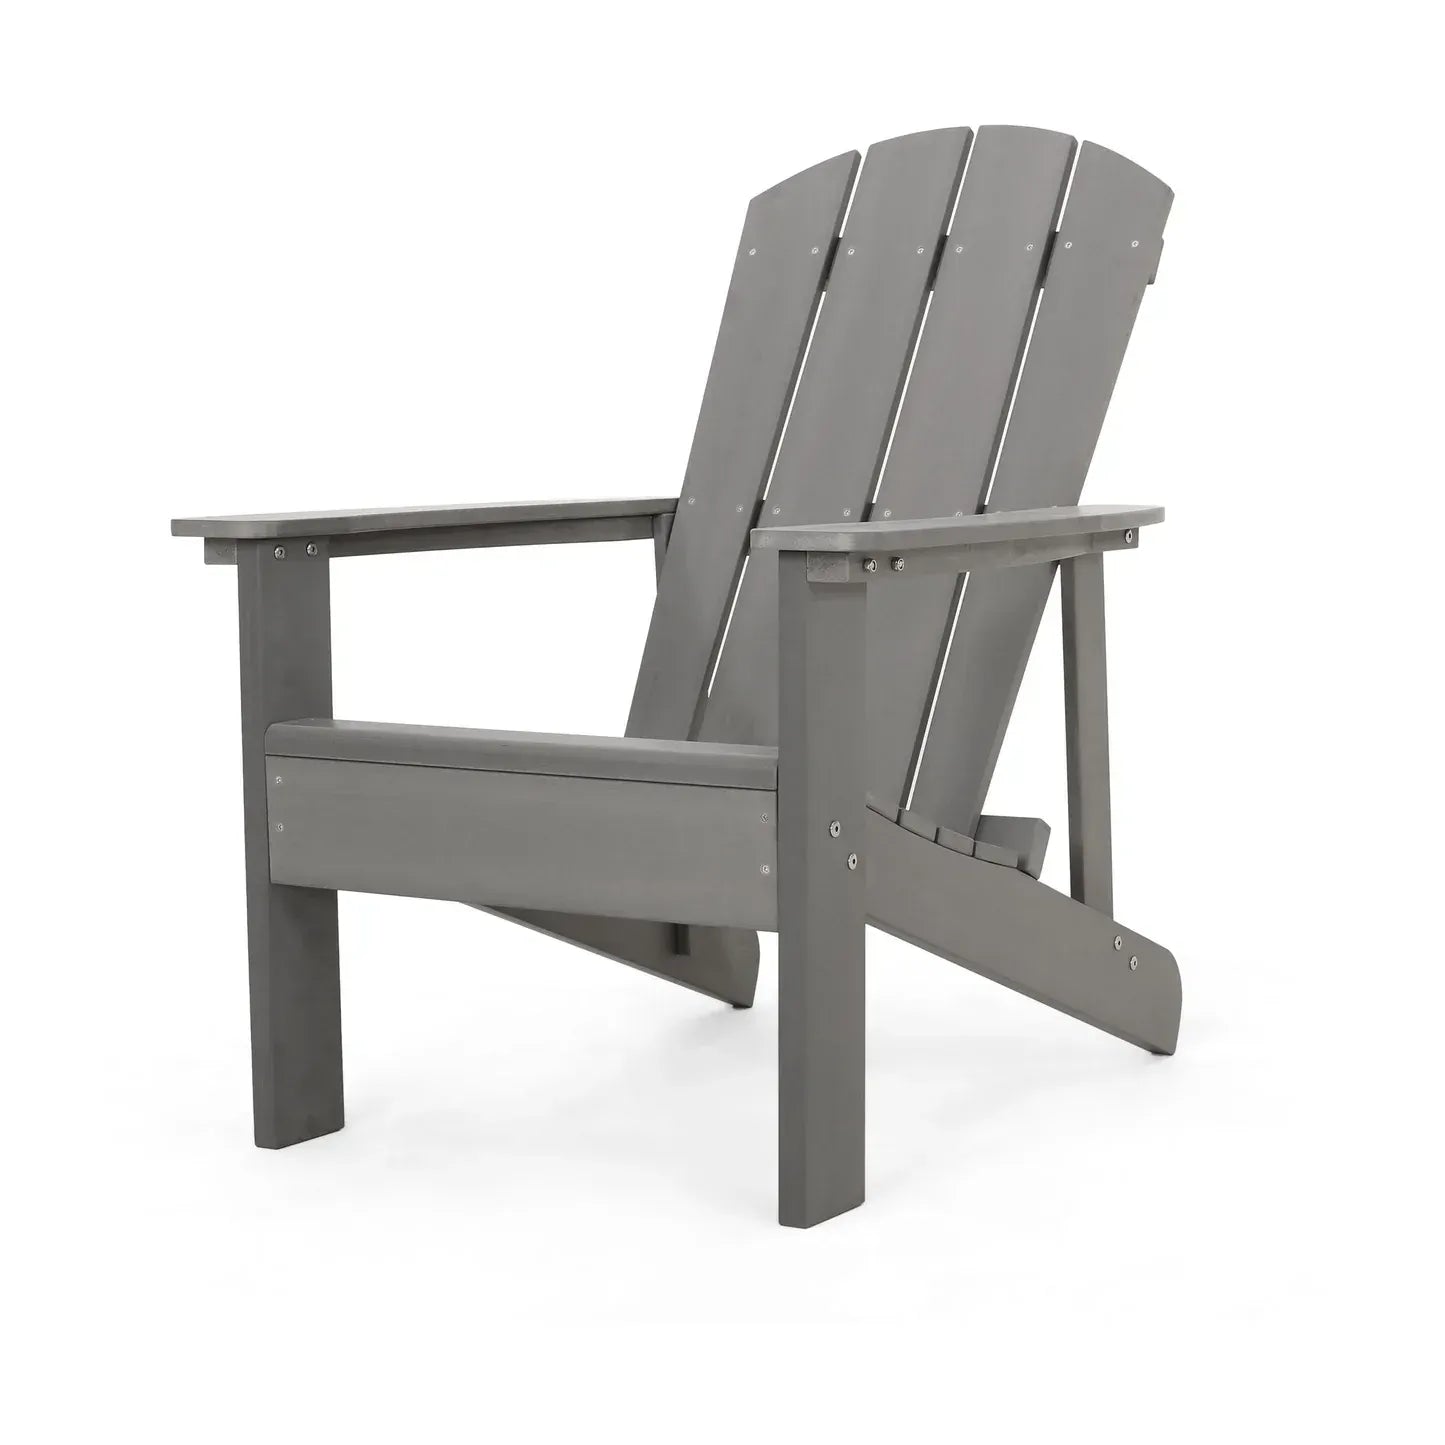 Classic Solid Gray Outdoor Solid Wood Adirondack Chair Garden Lounge Chair